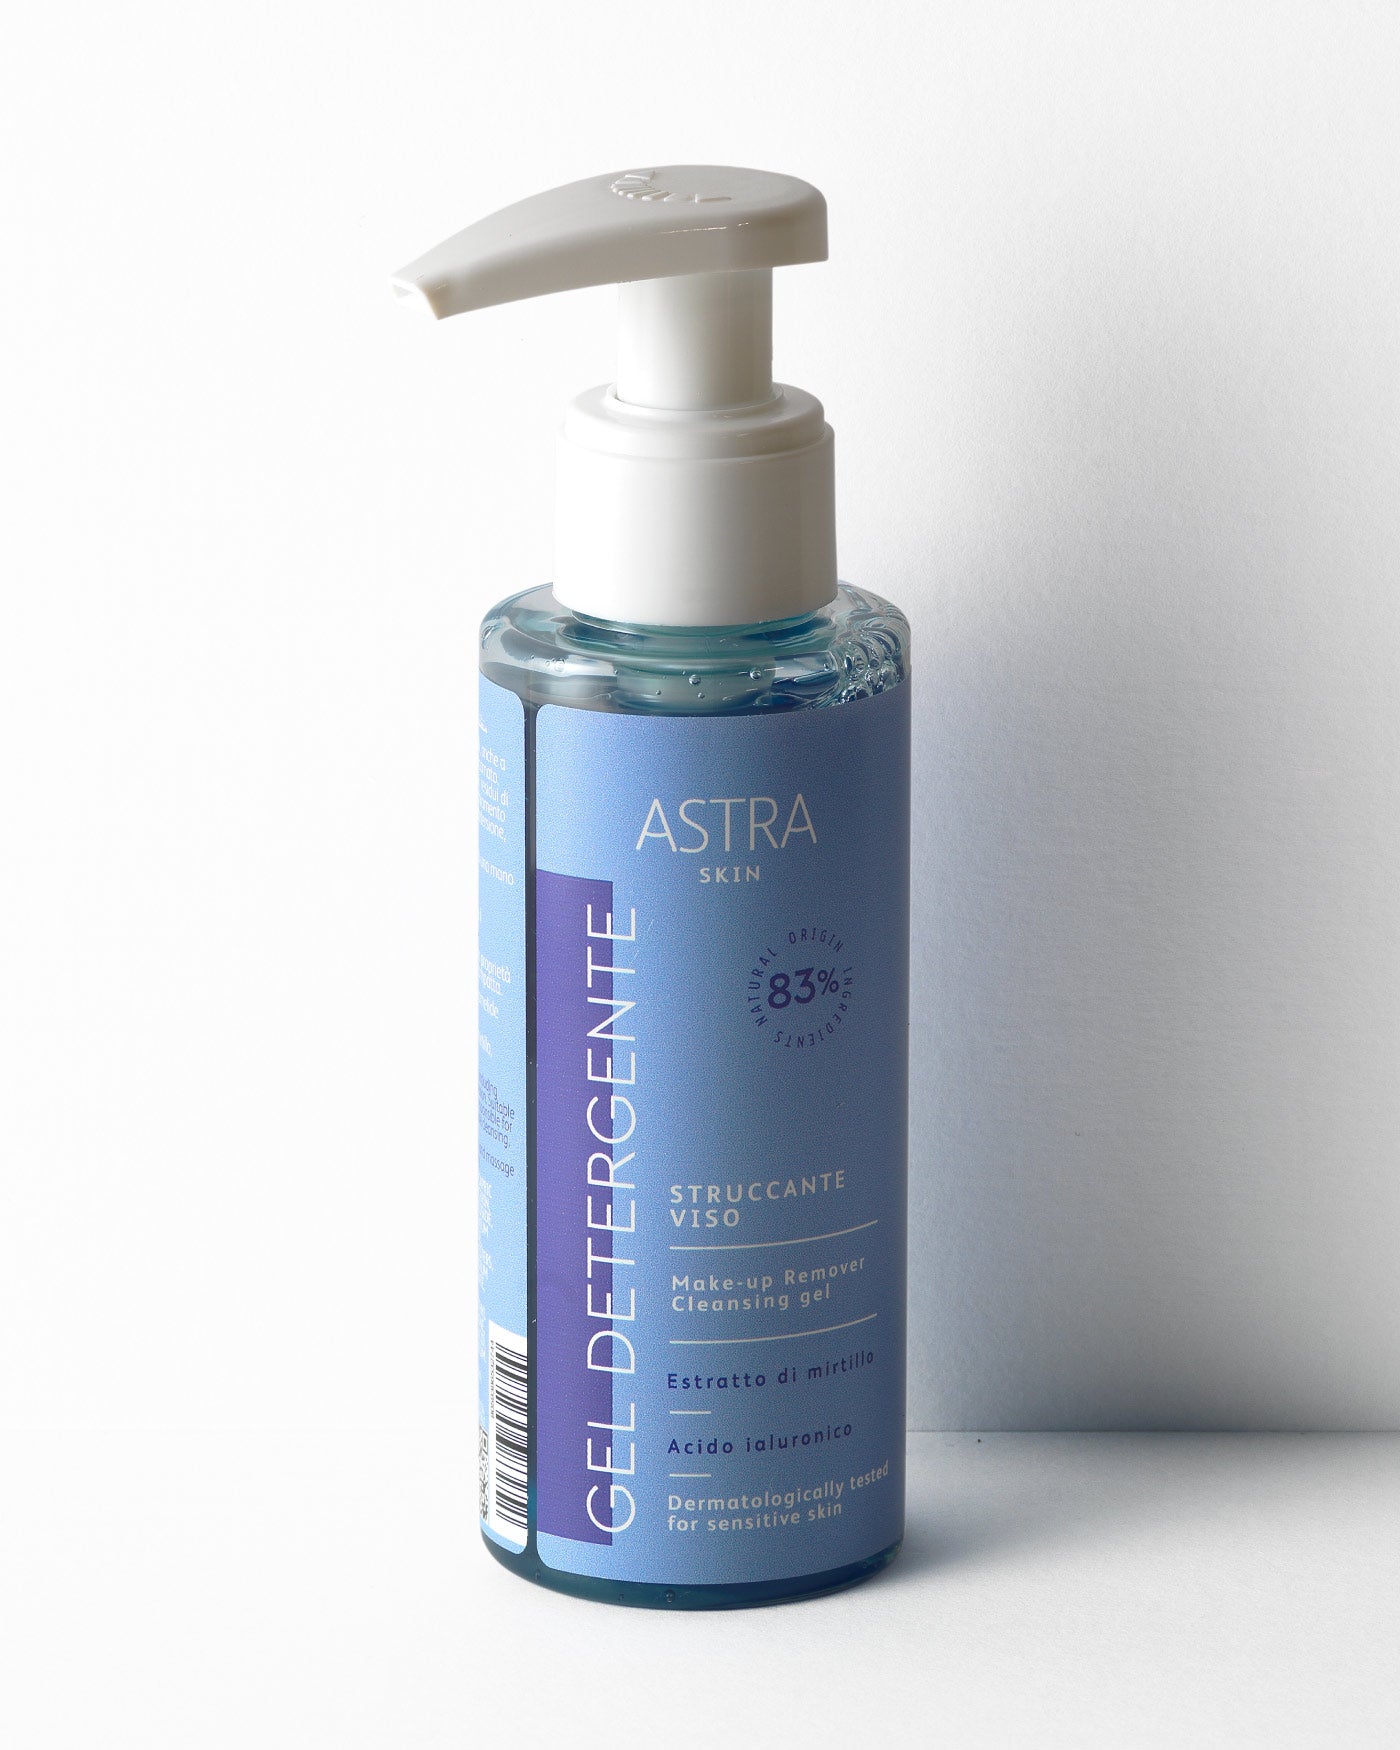 GEL DETERGENTE - All Products - Astra Make-Up